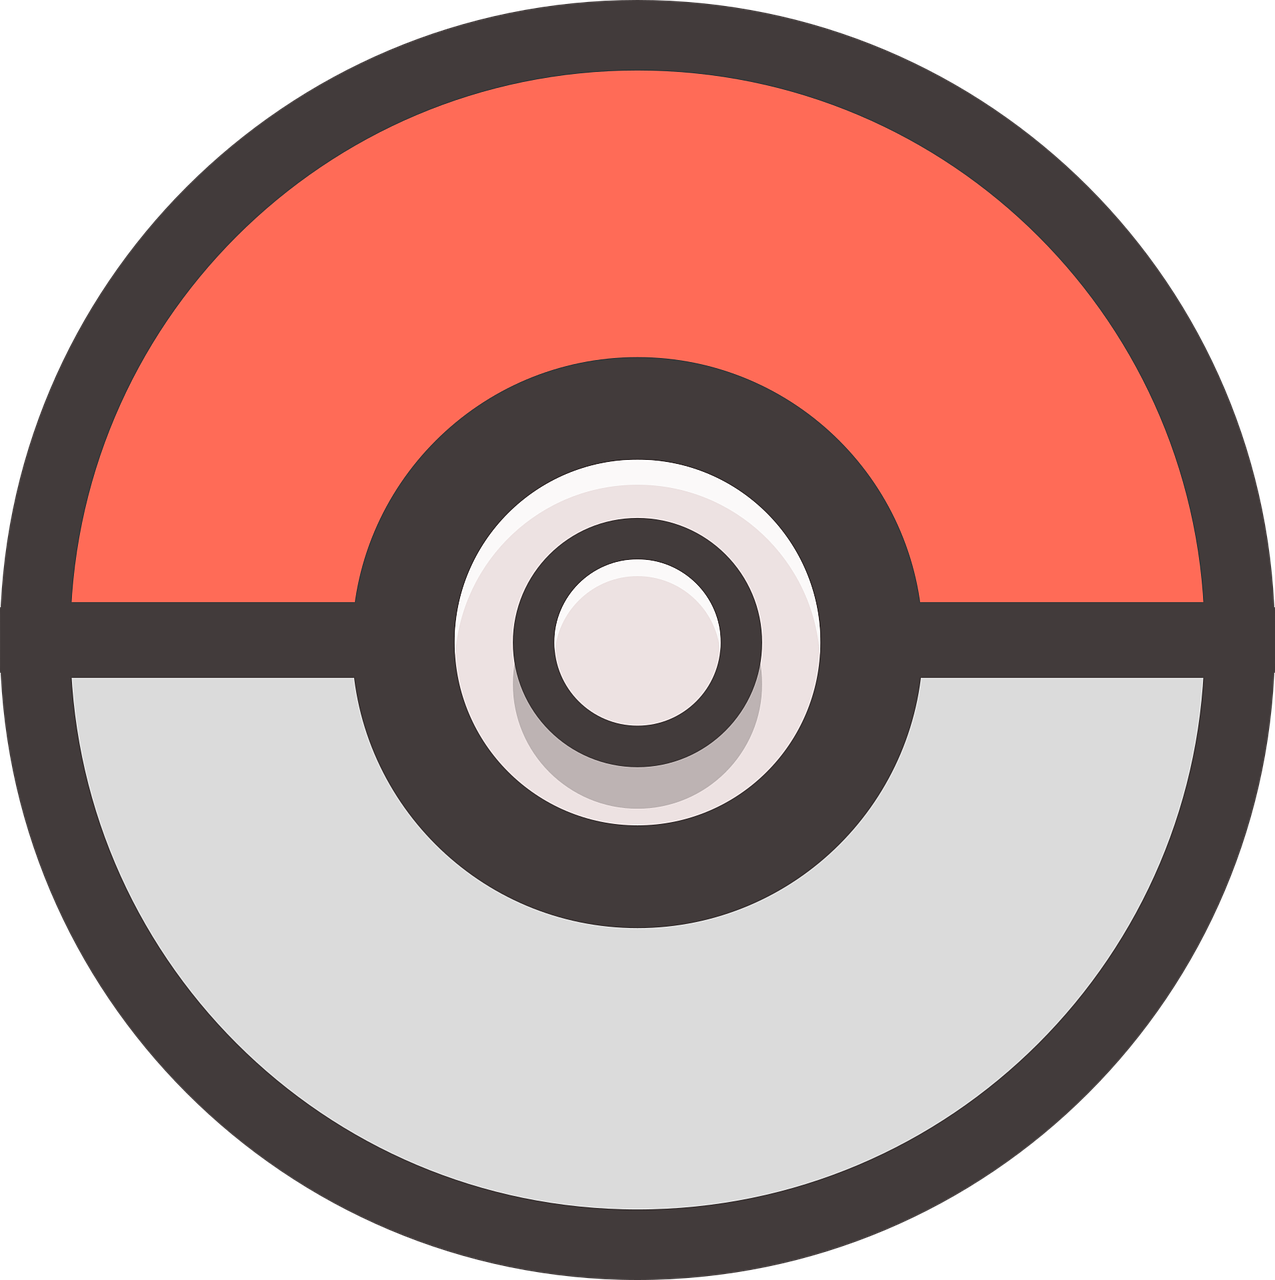 Image of a red and white pokeball